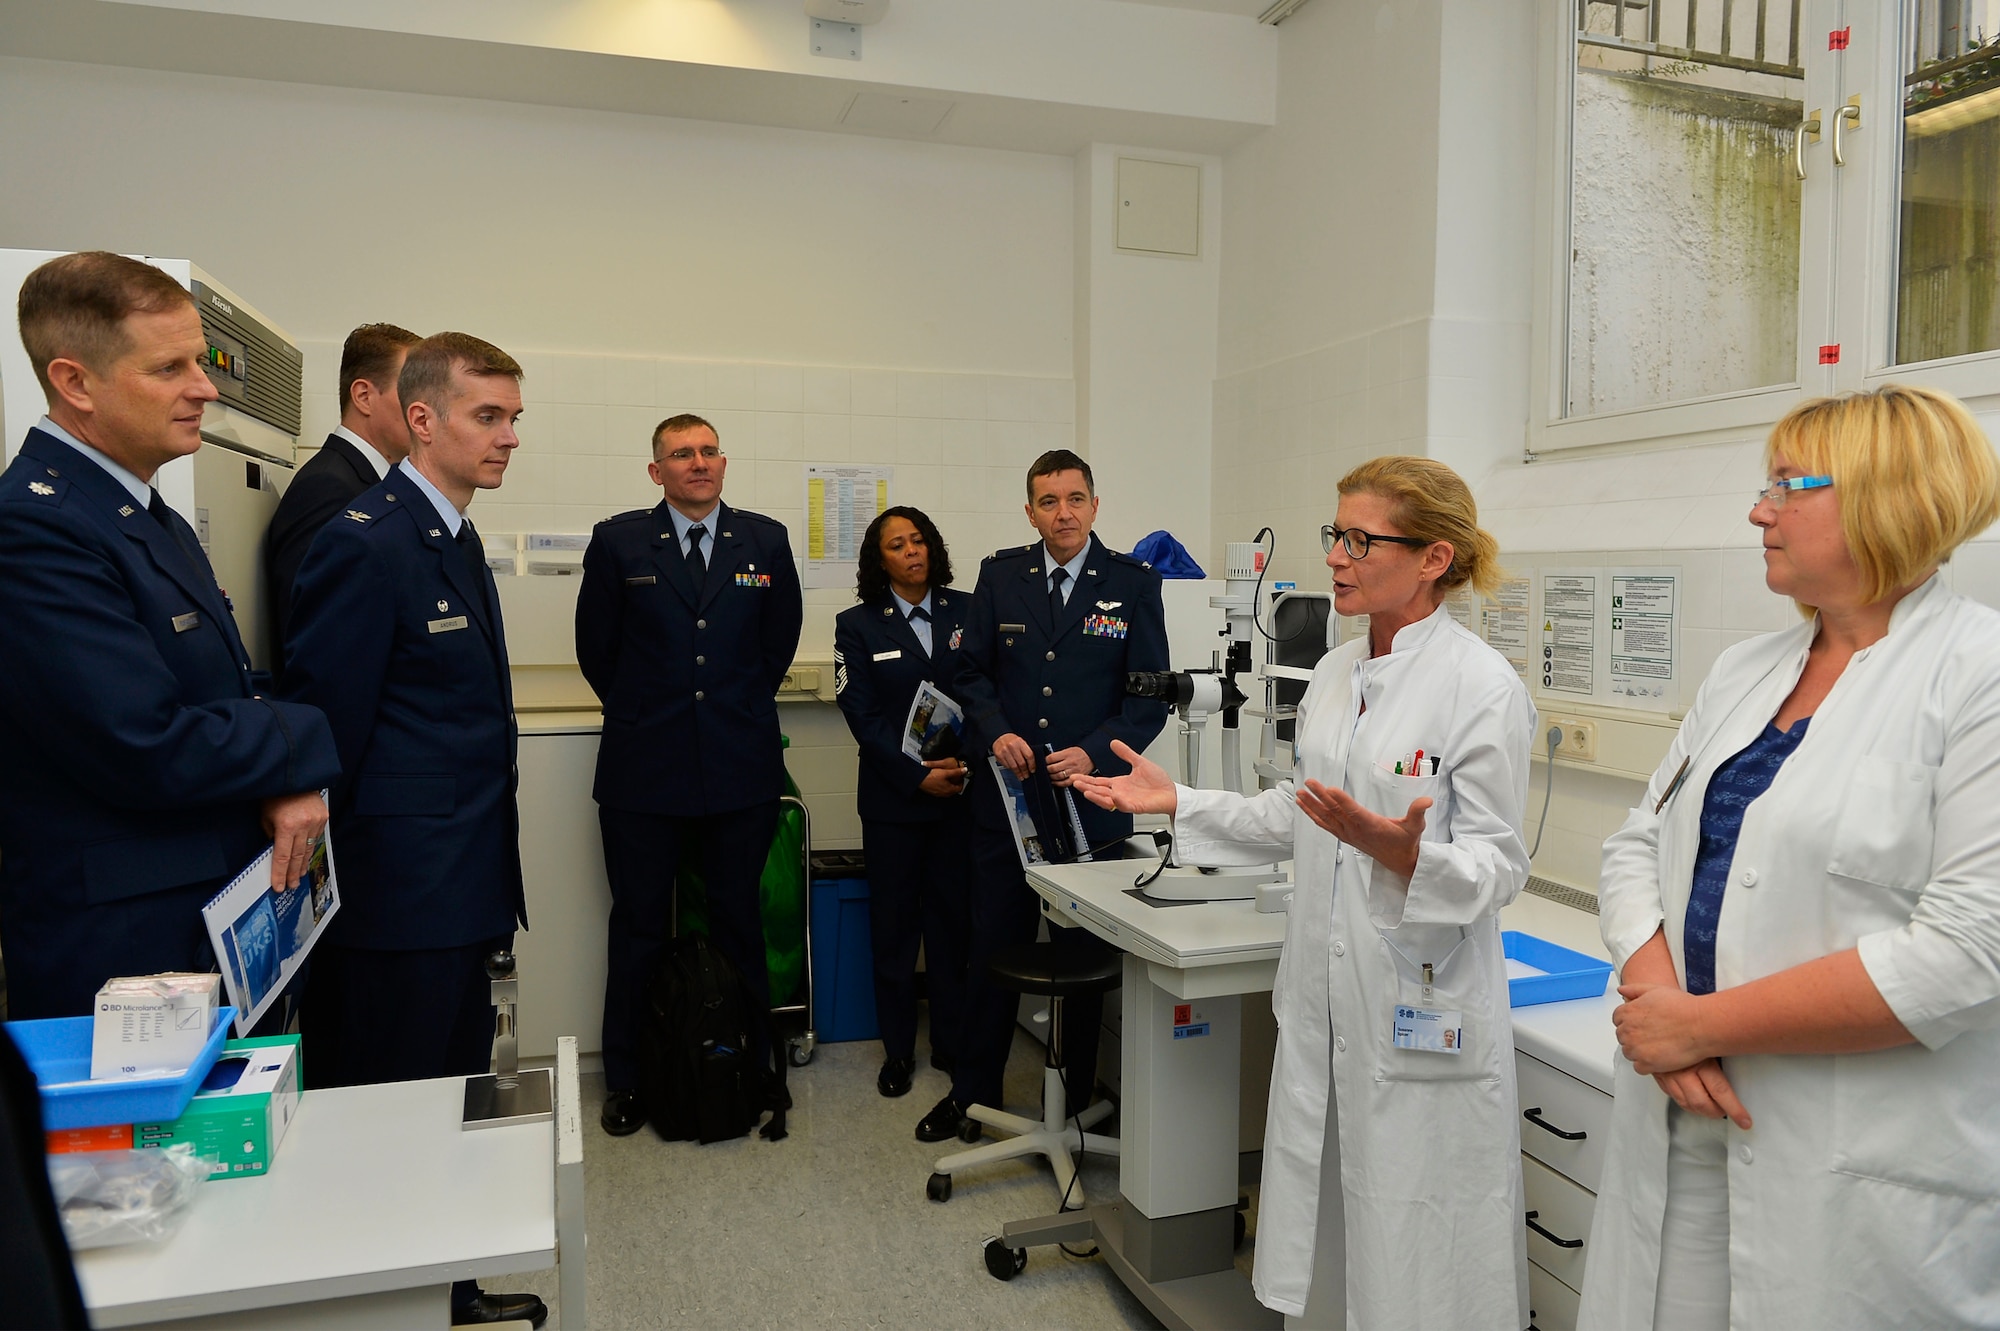 U.S. service members assigned to the 86th Medical Group and Landstuhl Regional Medical Center receive a briefing from German medical professionals during a tour of Saarland University Medical Center in Homburg, Germany Nov. 9, 2017. The medical center plays a major role in providing quality healthcare for members of the Kaiserslautern Military Community. (U.S. Air Force photo by Airman 1st Class Joshua Magbanua)